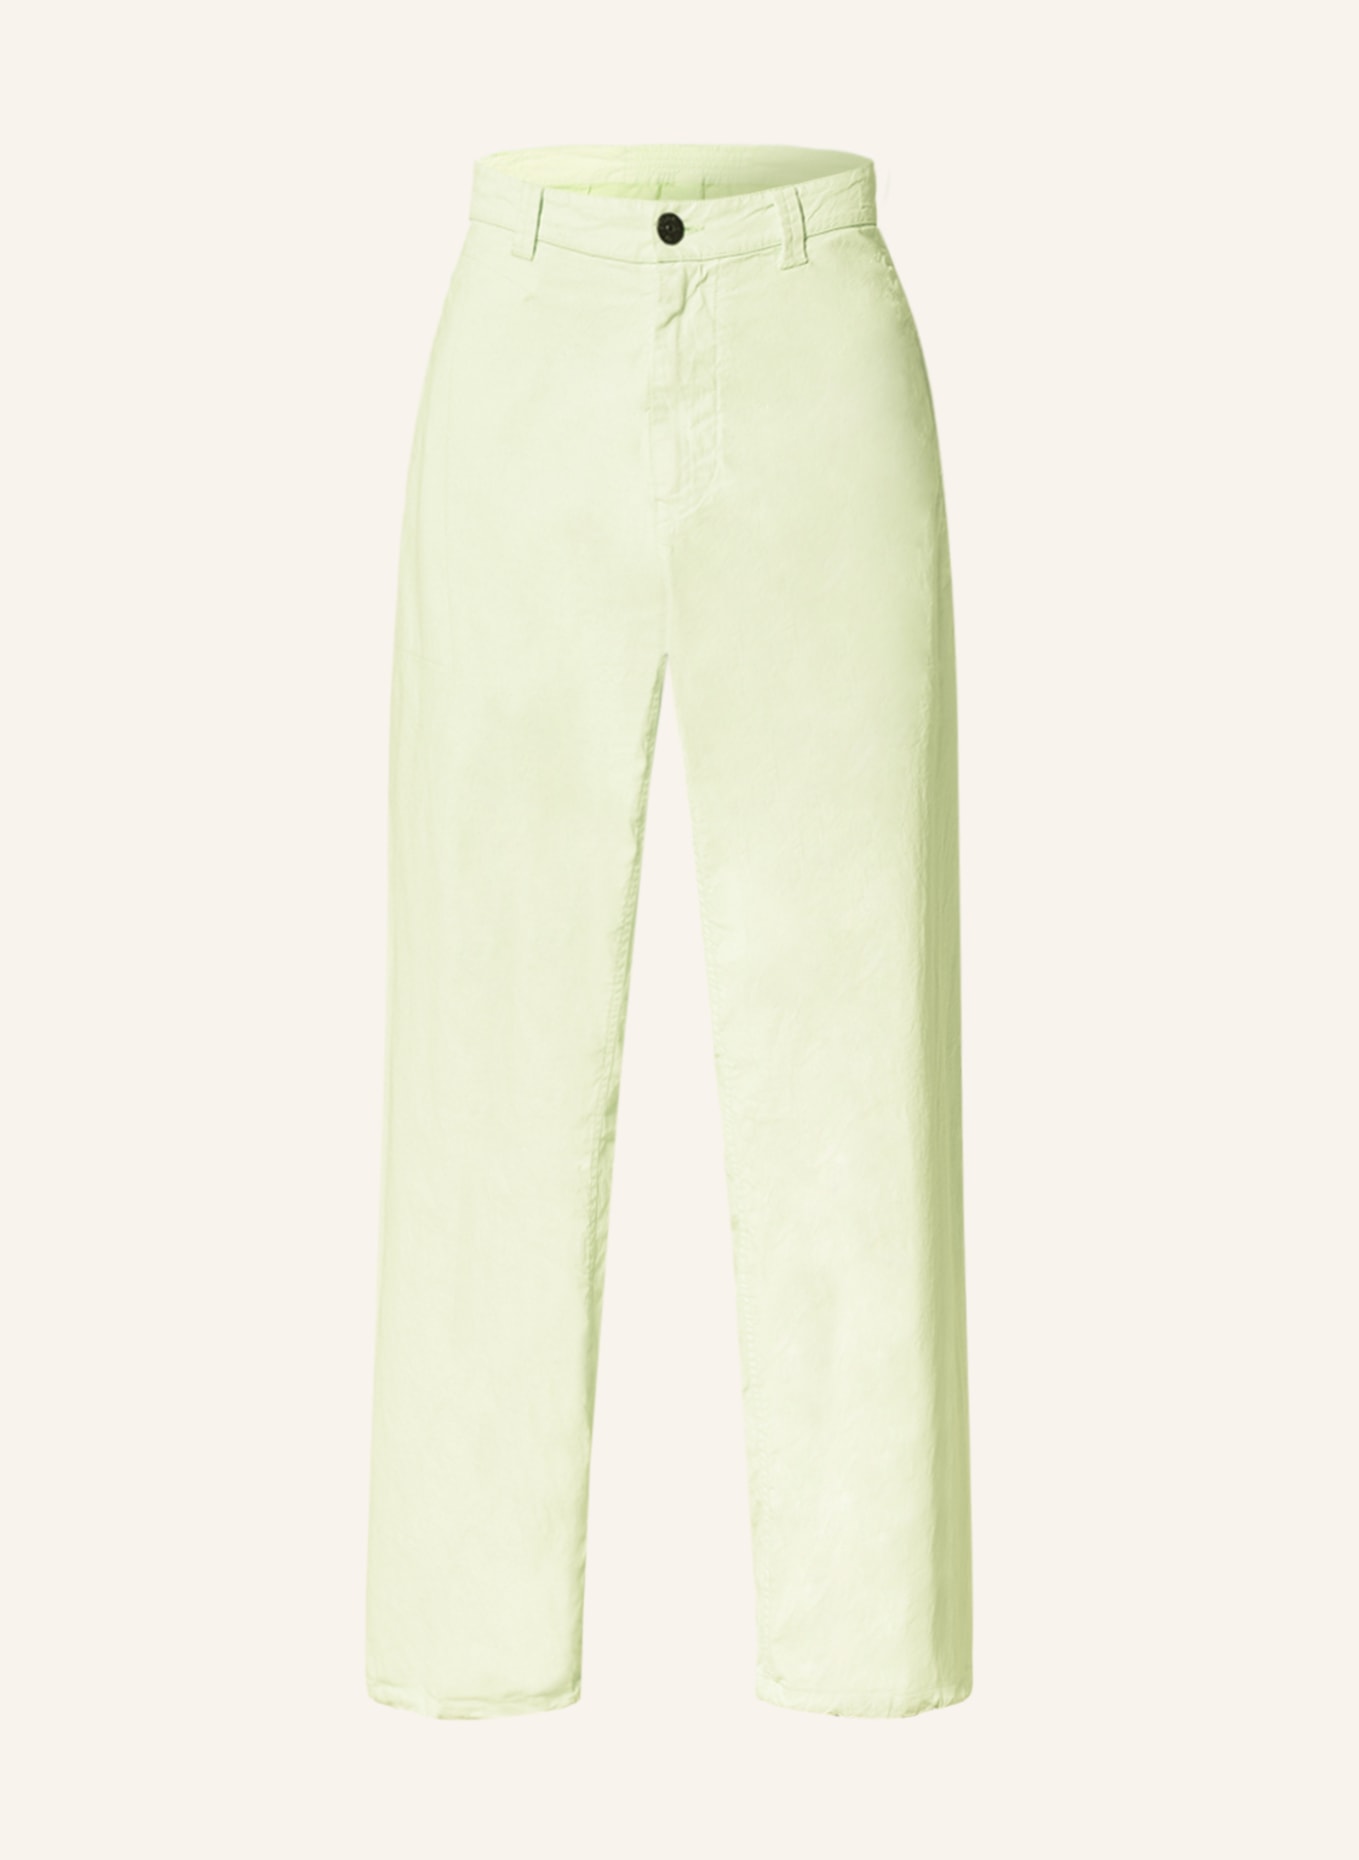 STONE ISLAND Trousers MARINA loose fit, Color: MINT (Image 1)